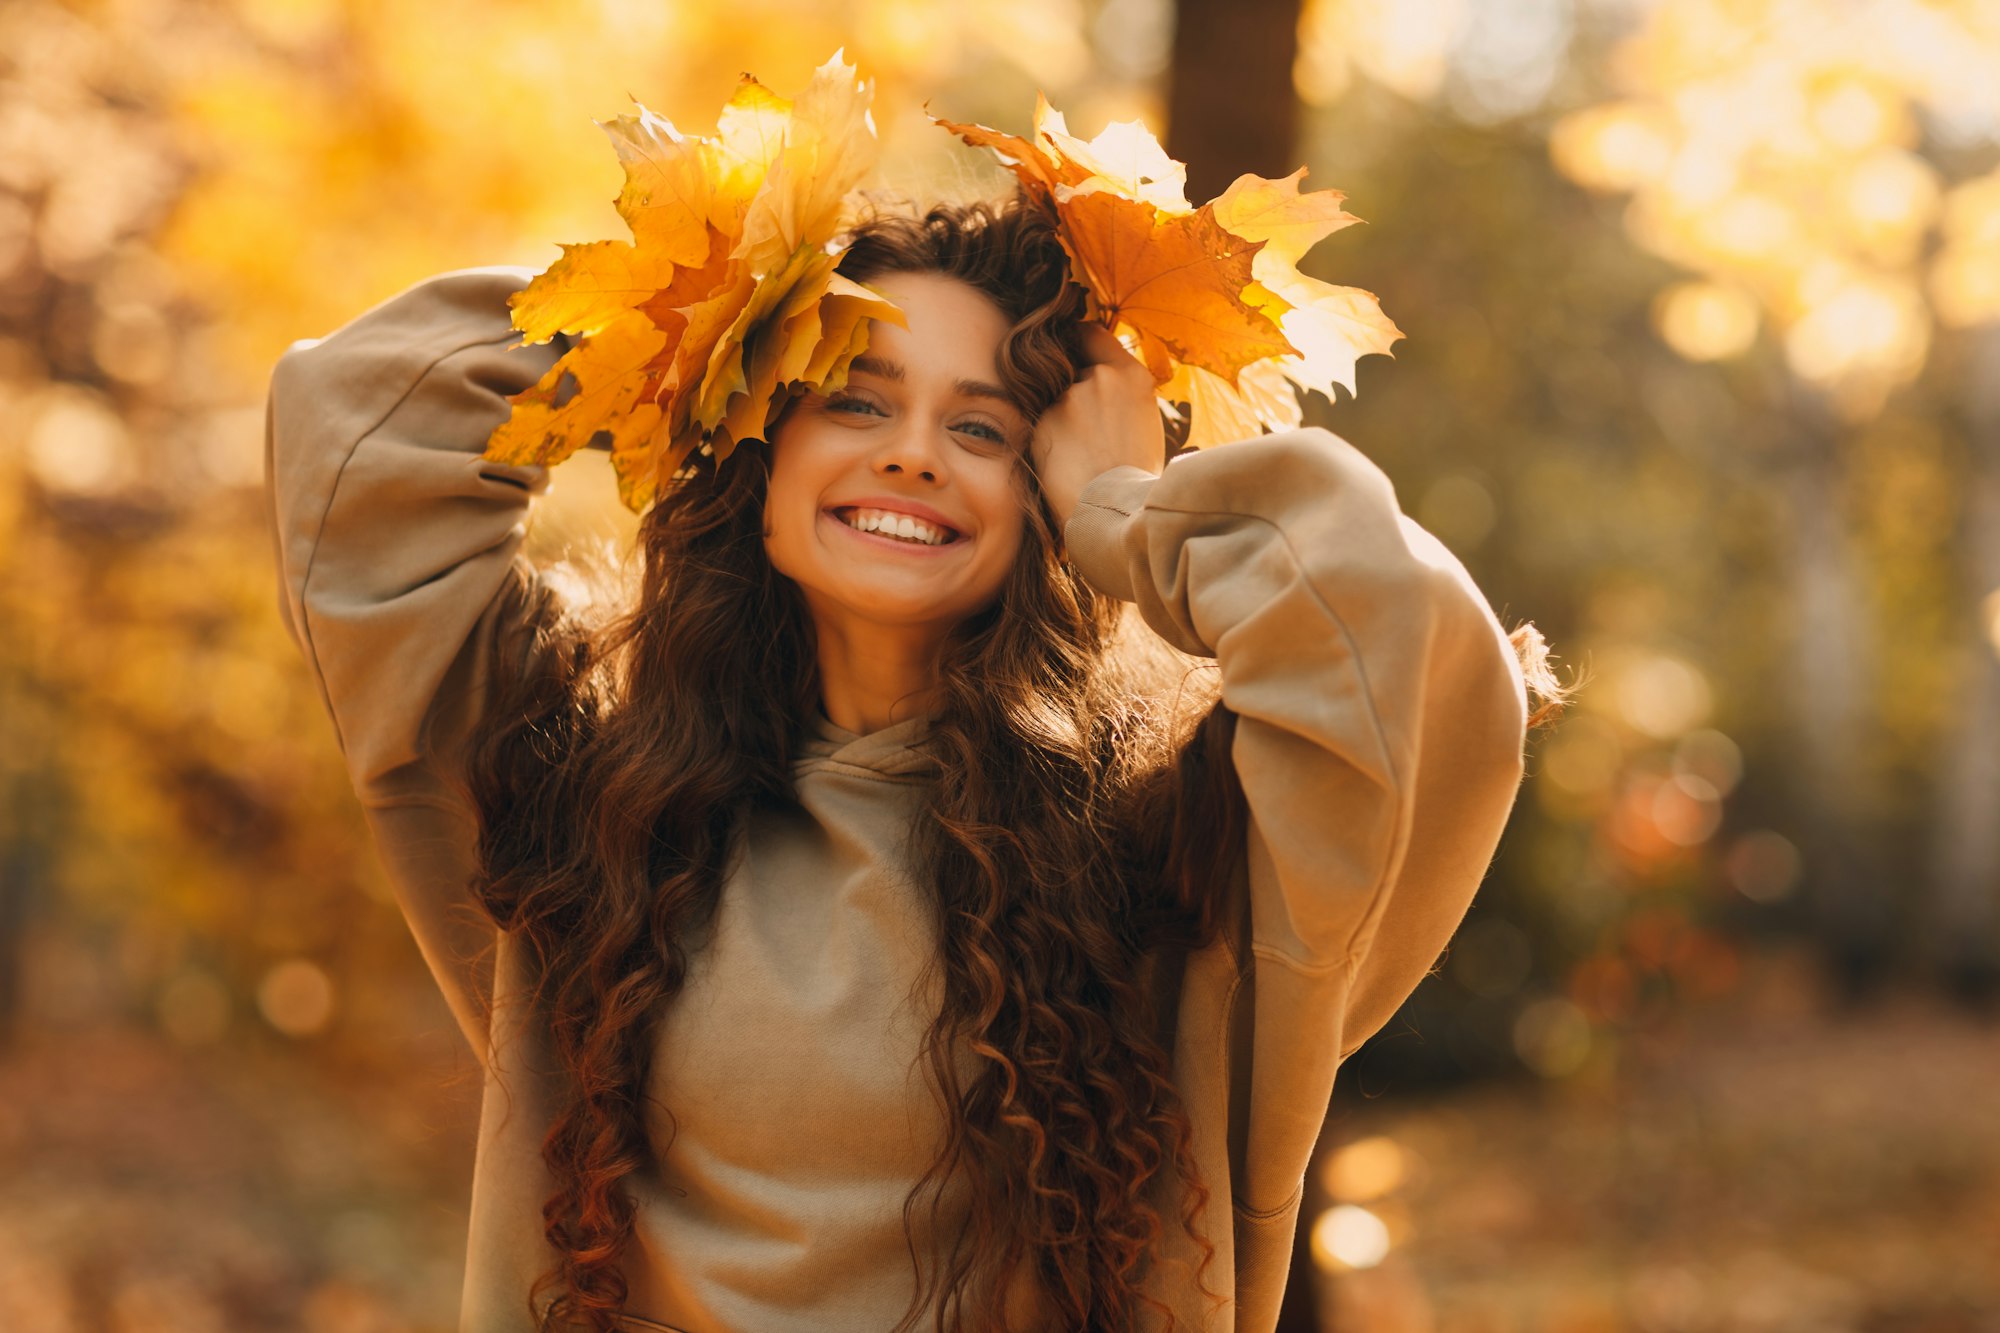 Smiling young woman enjoys the autumn weather in the fall park with the yellow leaves at sunset